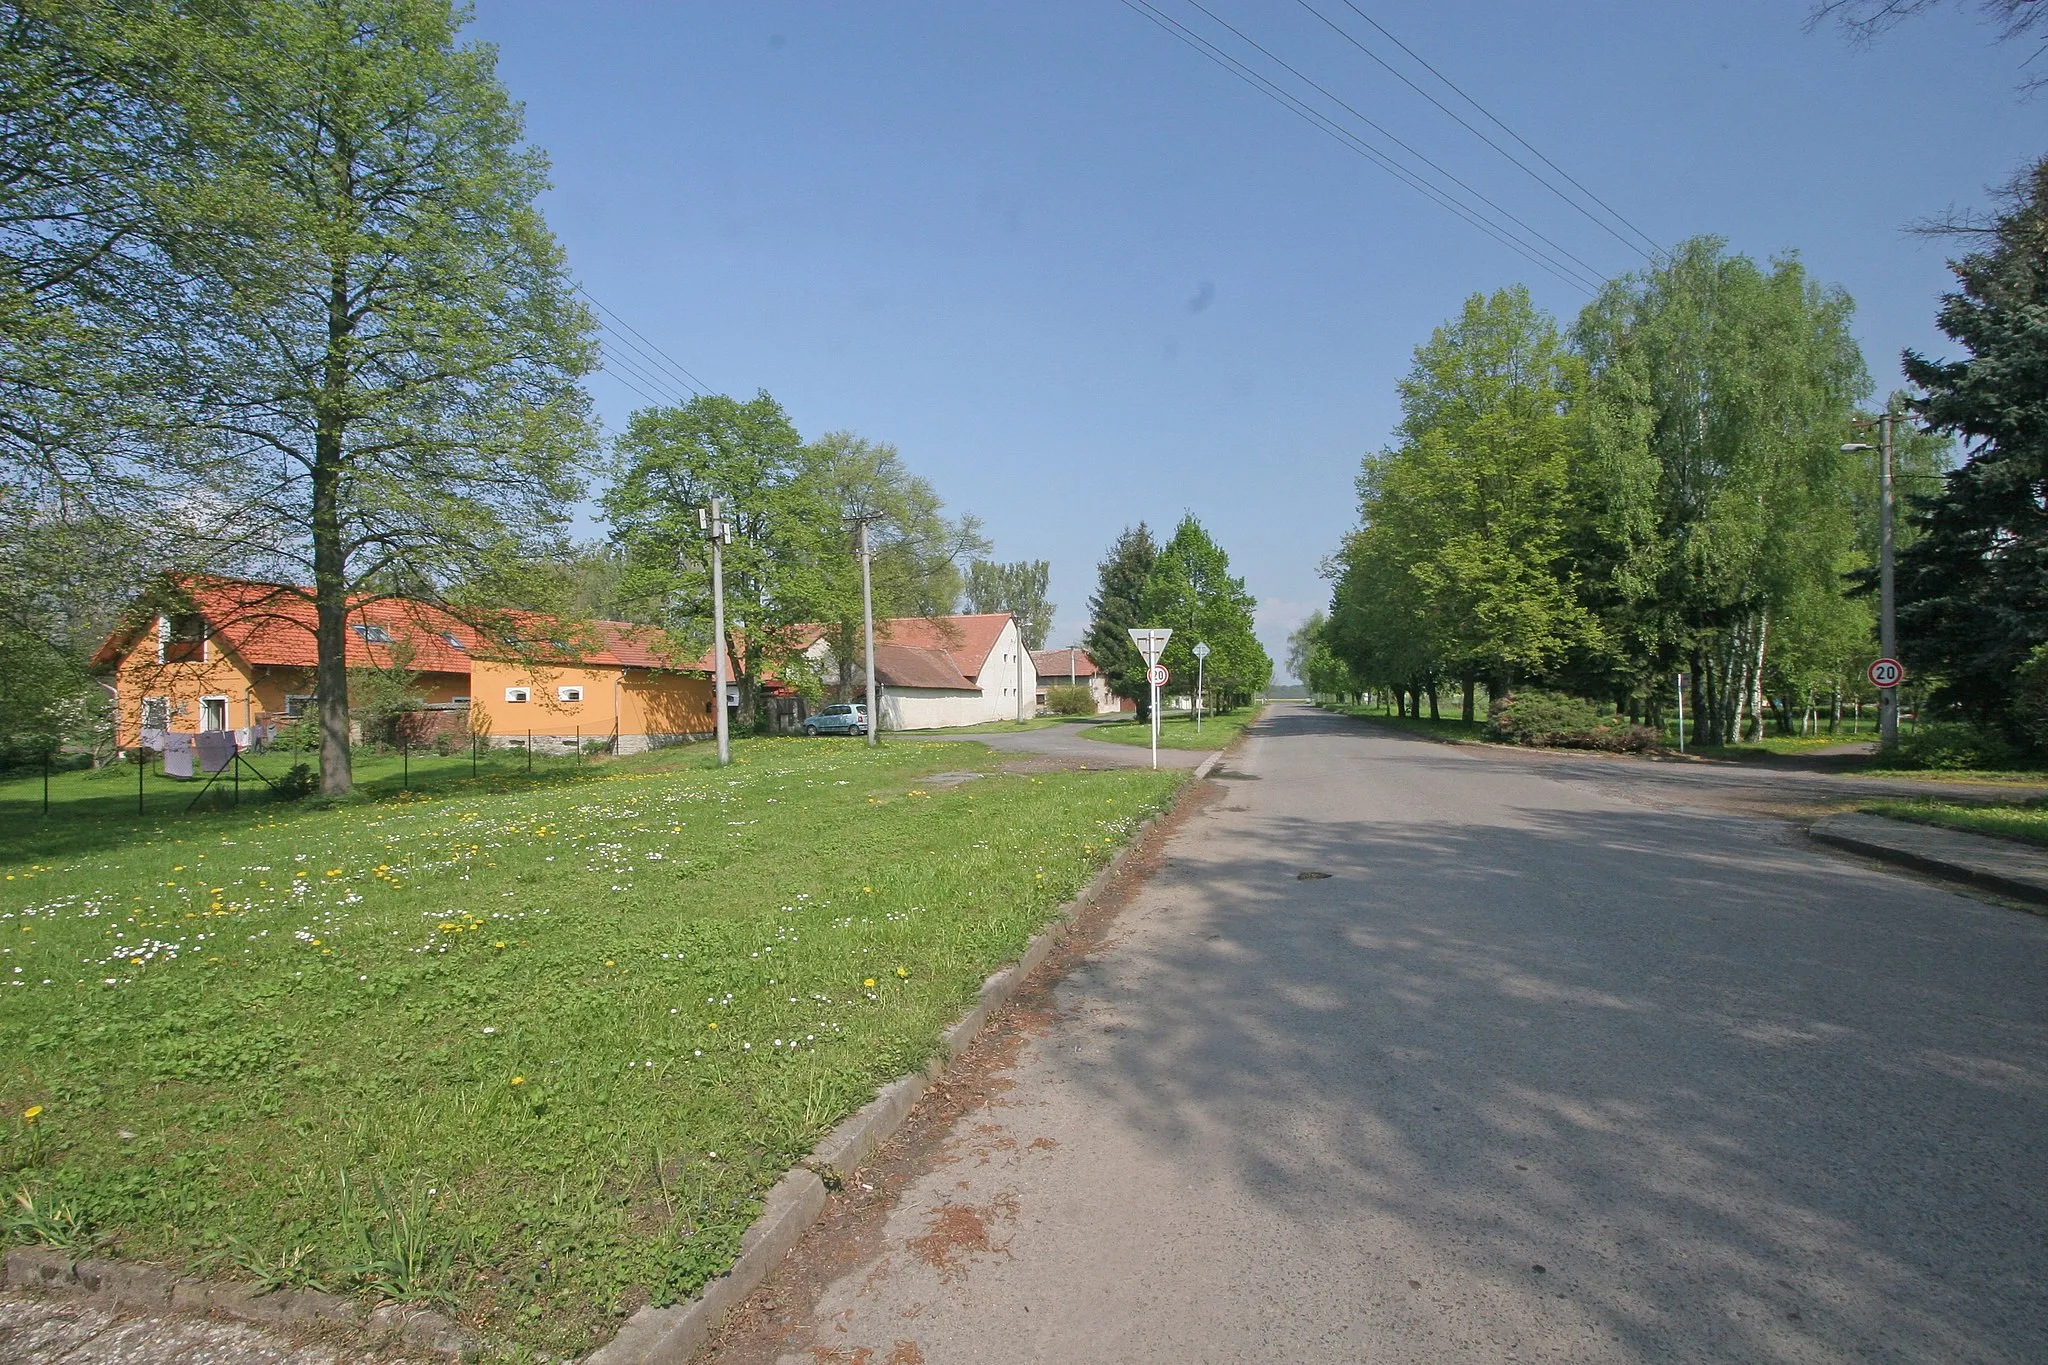 Photo showing: Lány u Dašic náves
Camera location 50° 02′ 39.89″ N, 15° 53′ 20.2″ E View this and other nearby images on: OpenStreetMap 50.044415;   15.888945

This file was created as a part of the photographic program of Wikimedia Czech Republic. Project: Foto českých obcí The program supports Wikimedia Commons photographers in the Czech Republic.